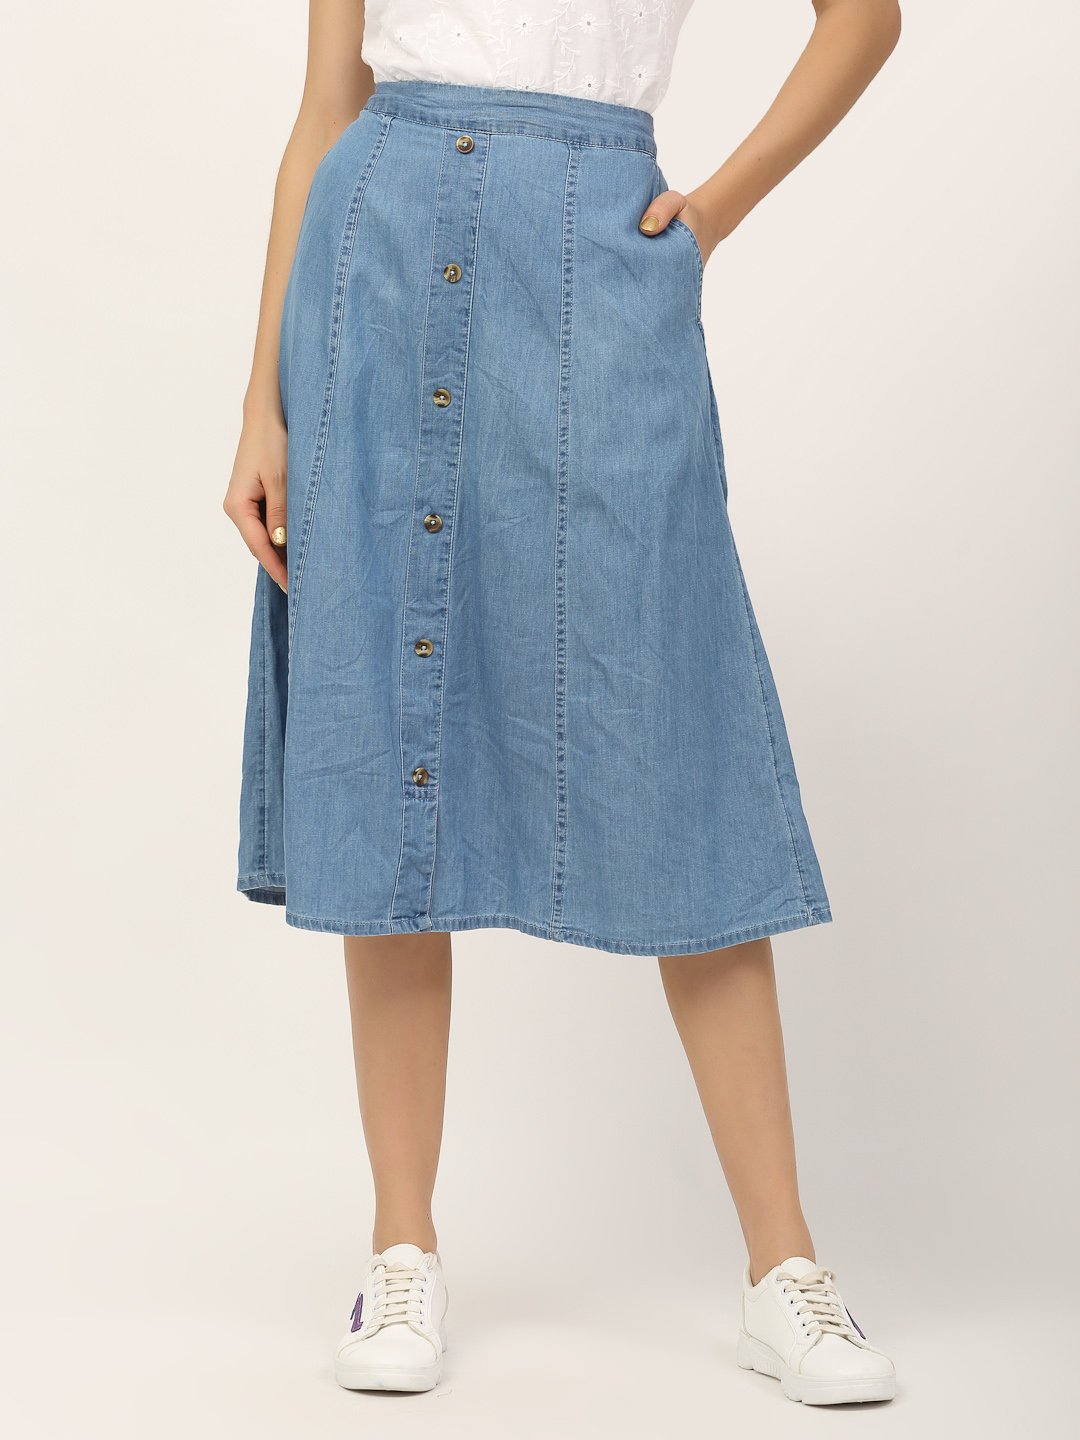 How to Style a Jean Skirt for Fall 2023